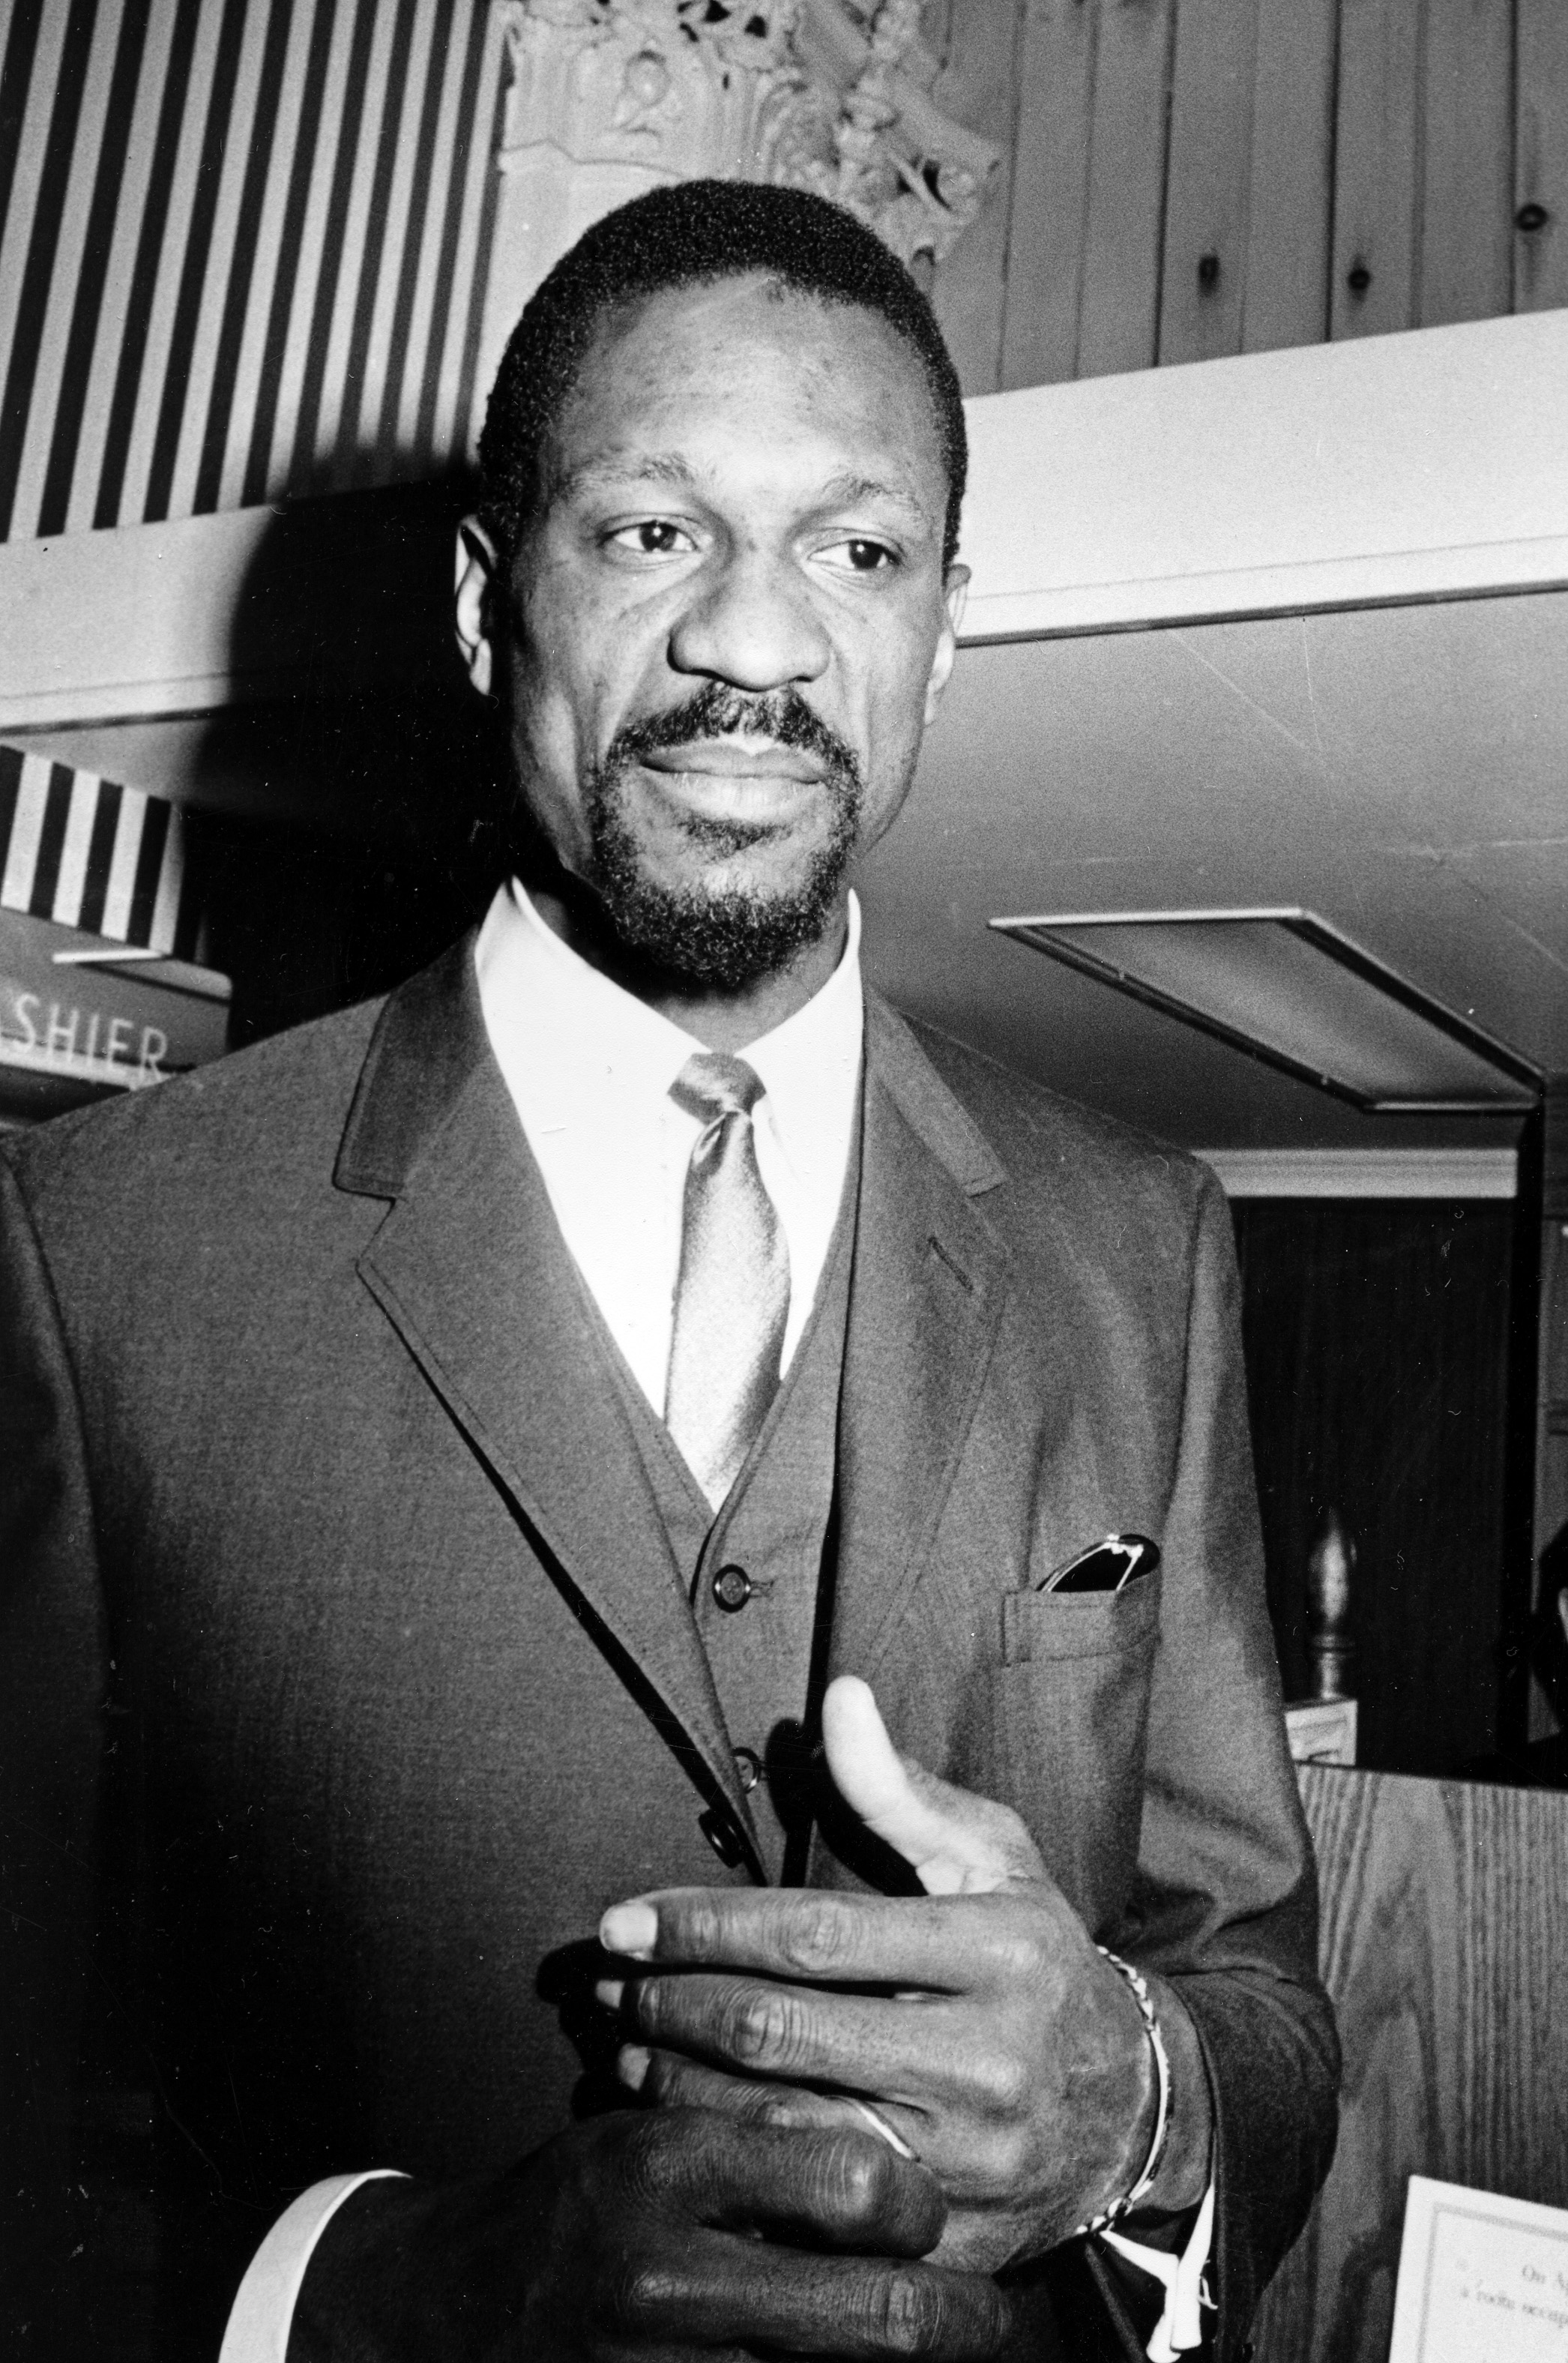 Boston Celtics' coach Bill Russell is seen during a press conference in Boston, April 18, 1966. cr: AP Images/Courtesy of Netflix